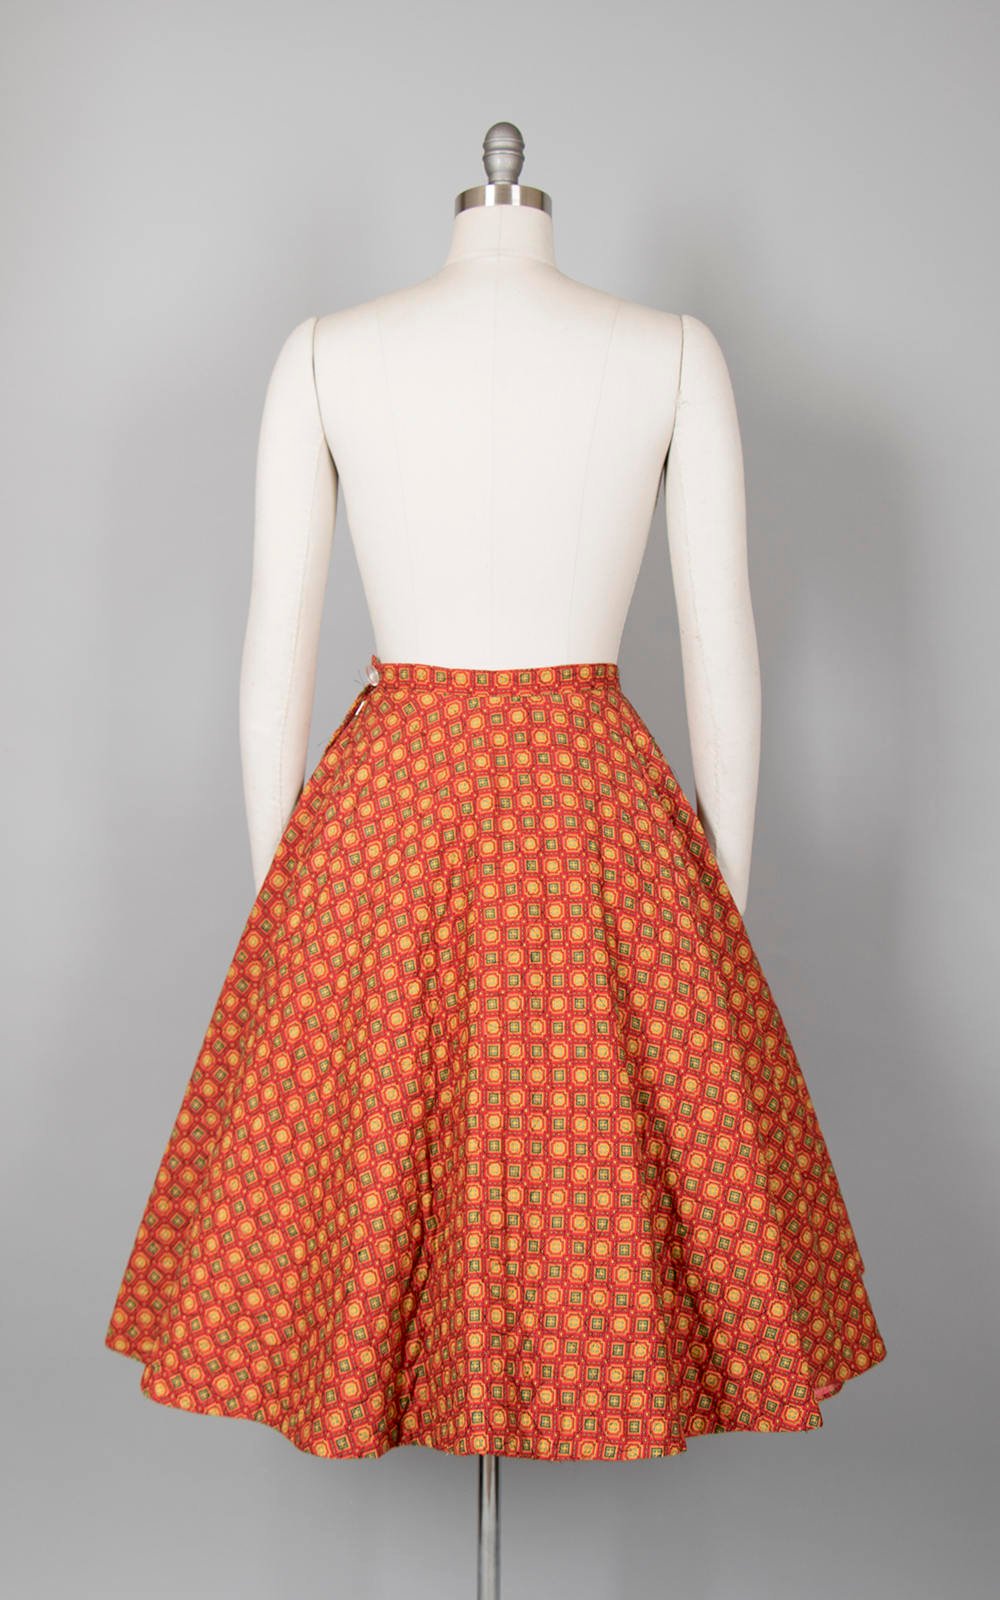 Vintage 1950s Circle Skirt | 50s Quilted Cotton Geometric Red Mustard Yellow Printed Winter Swing Skirt (x-small)